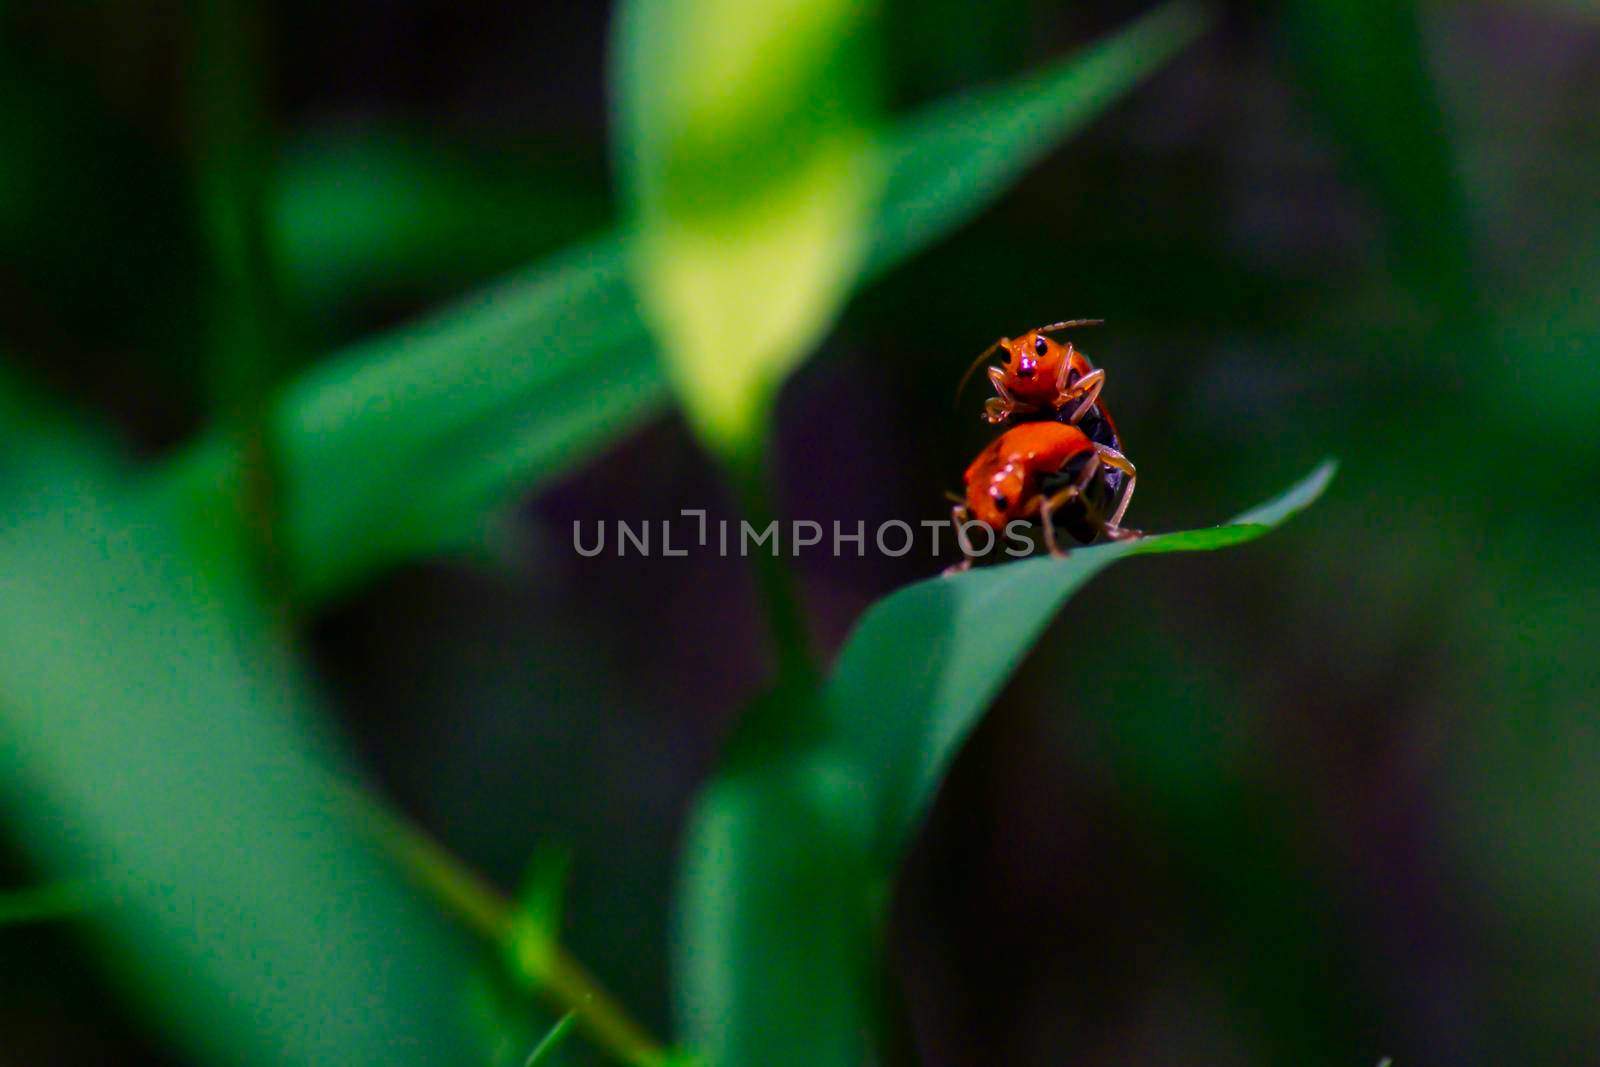 The small ants orange insect, lover ants ,relationship concept idea of love and friendship. Close up photography